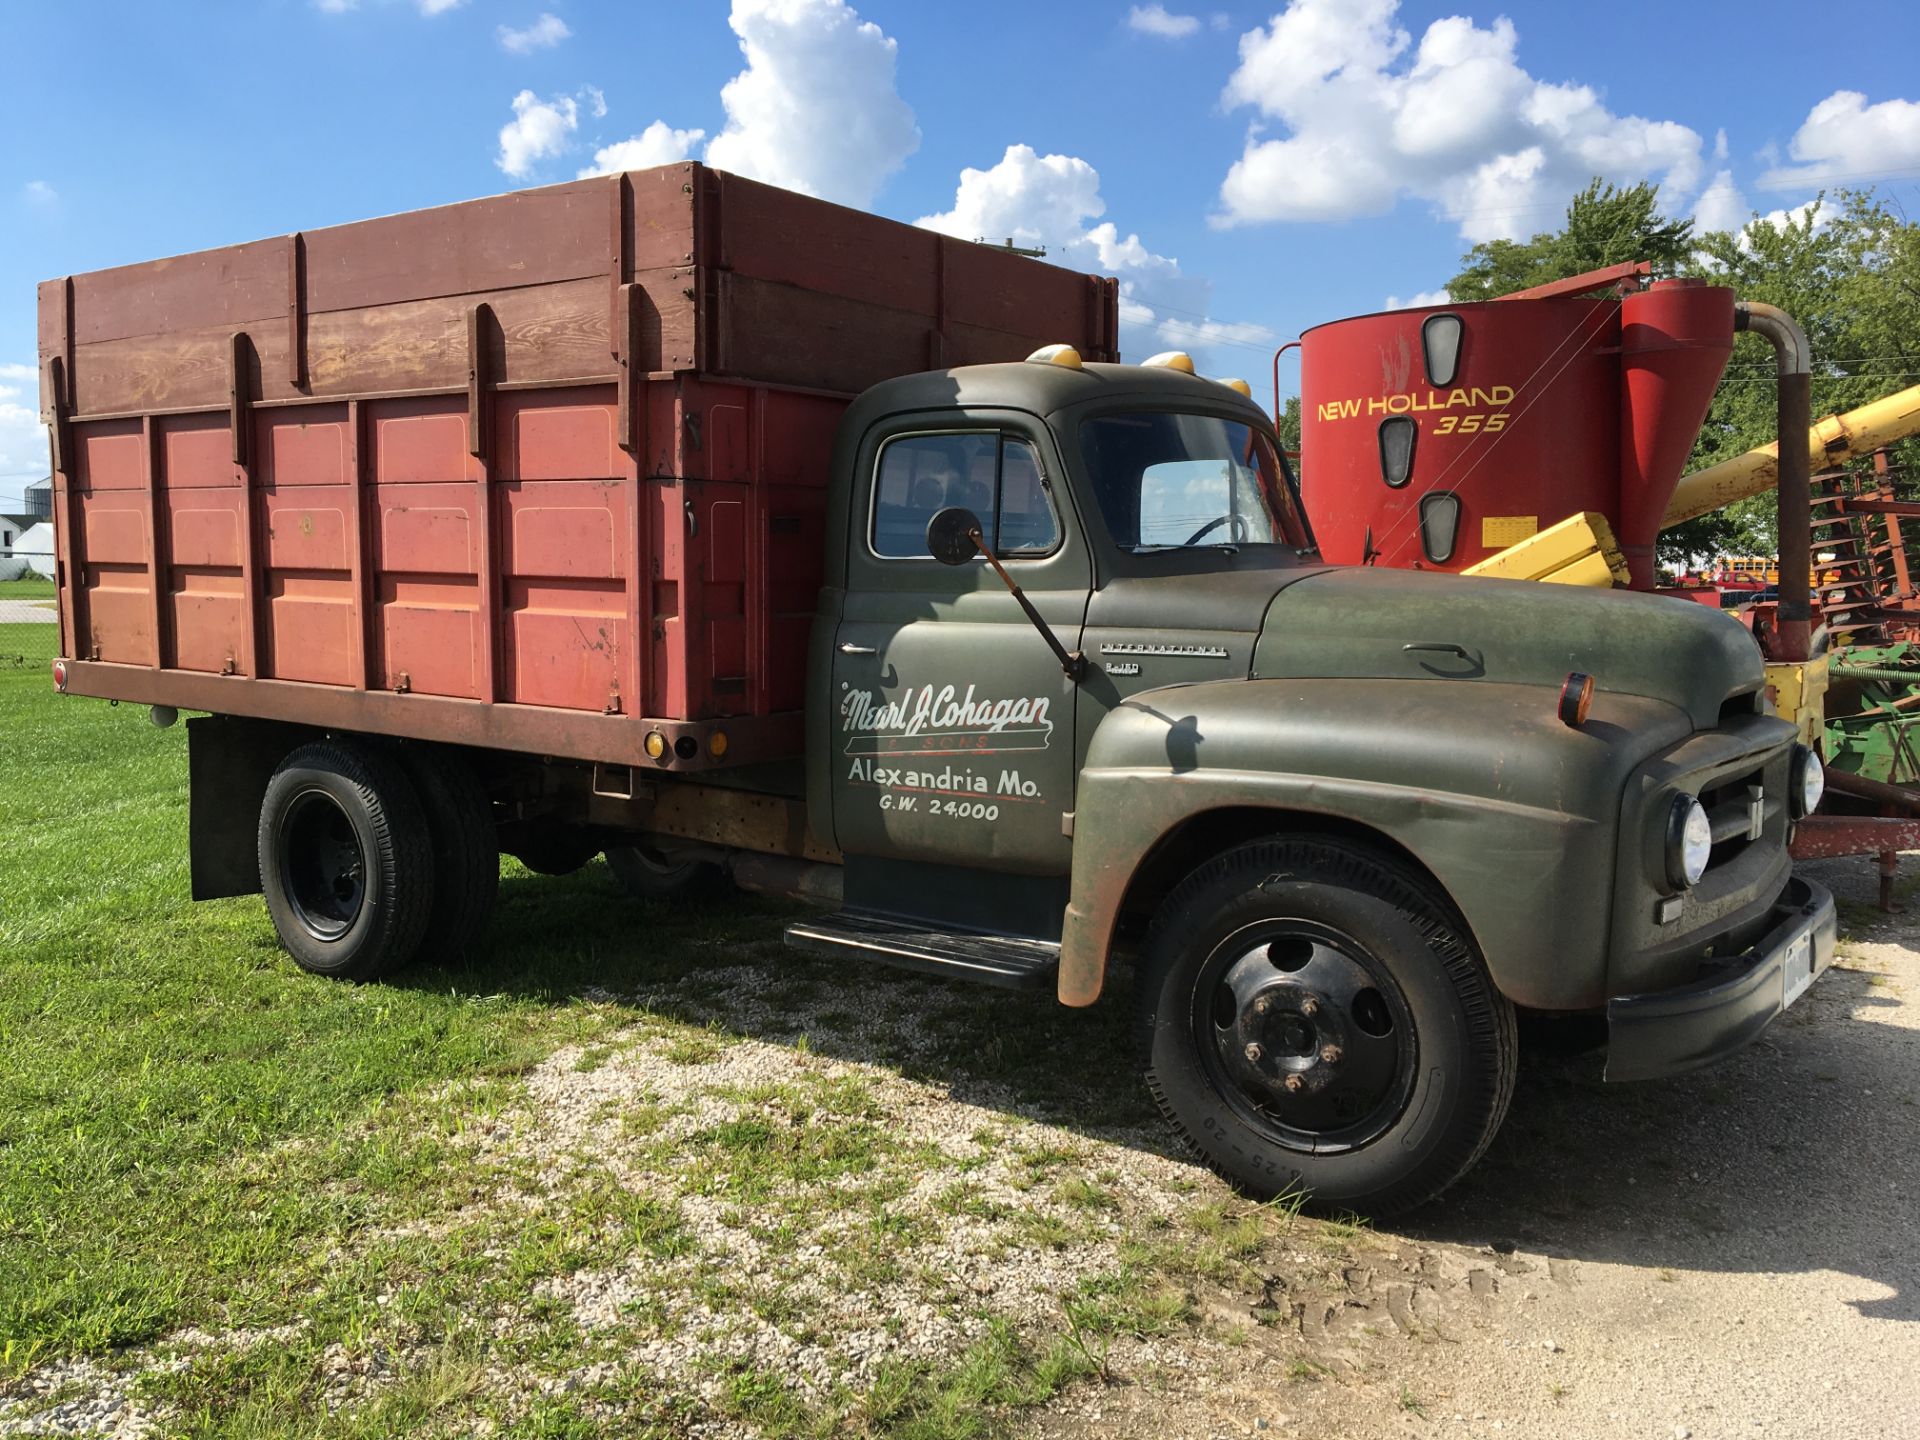 1956 Int R-160 series single axle truck with 11' grain bed and hoist, only 42,486 miles.